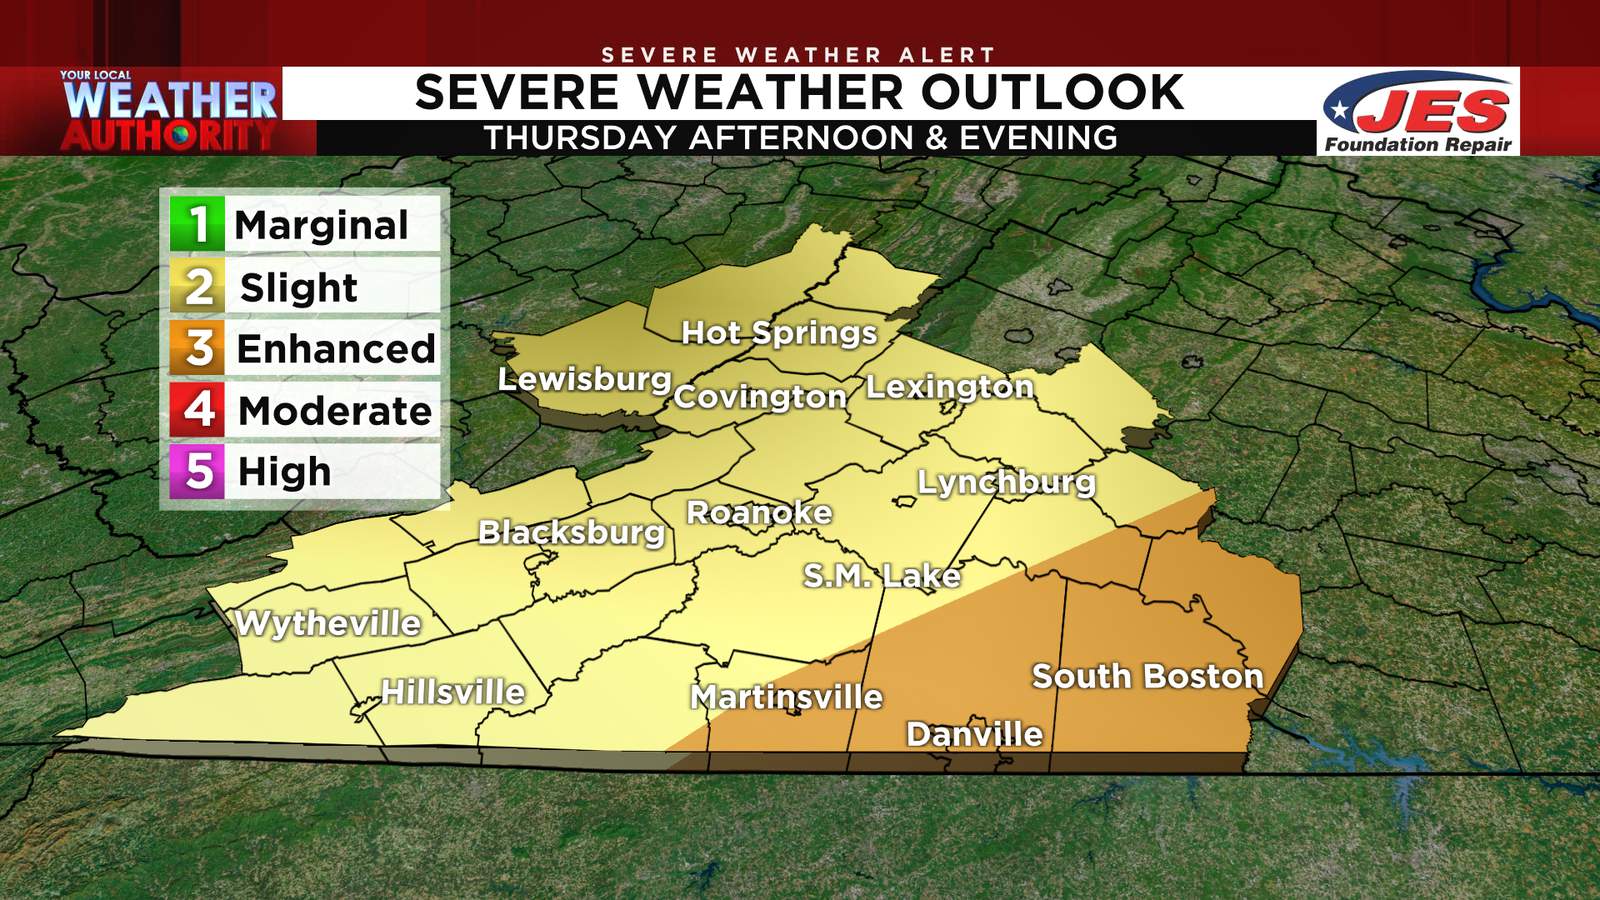 Potential for severe storms increasing for parts of the area Thursday